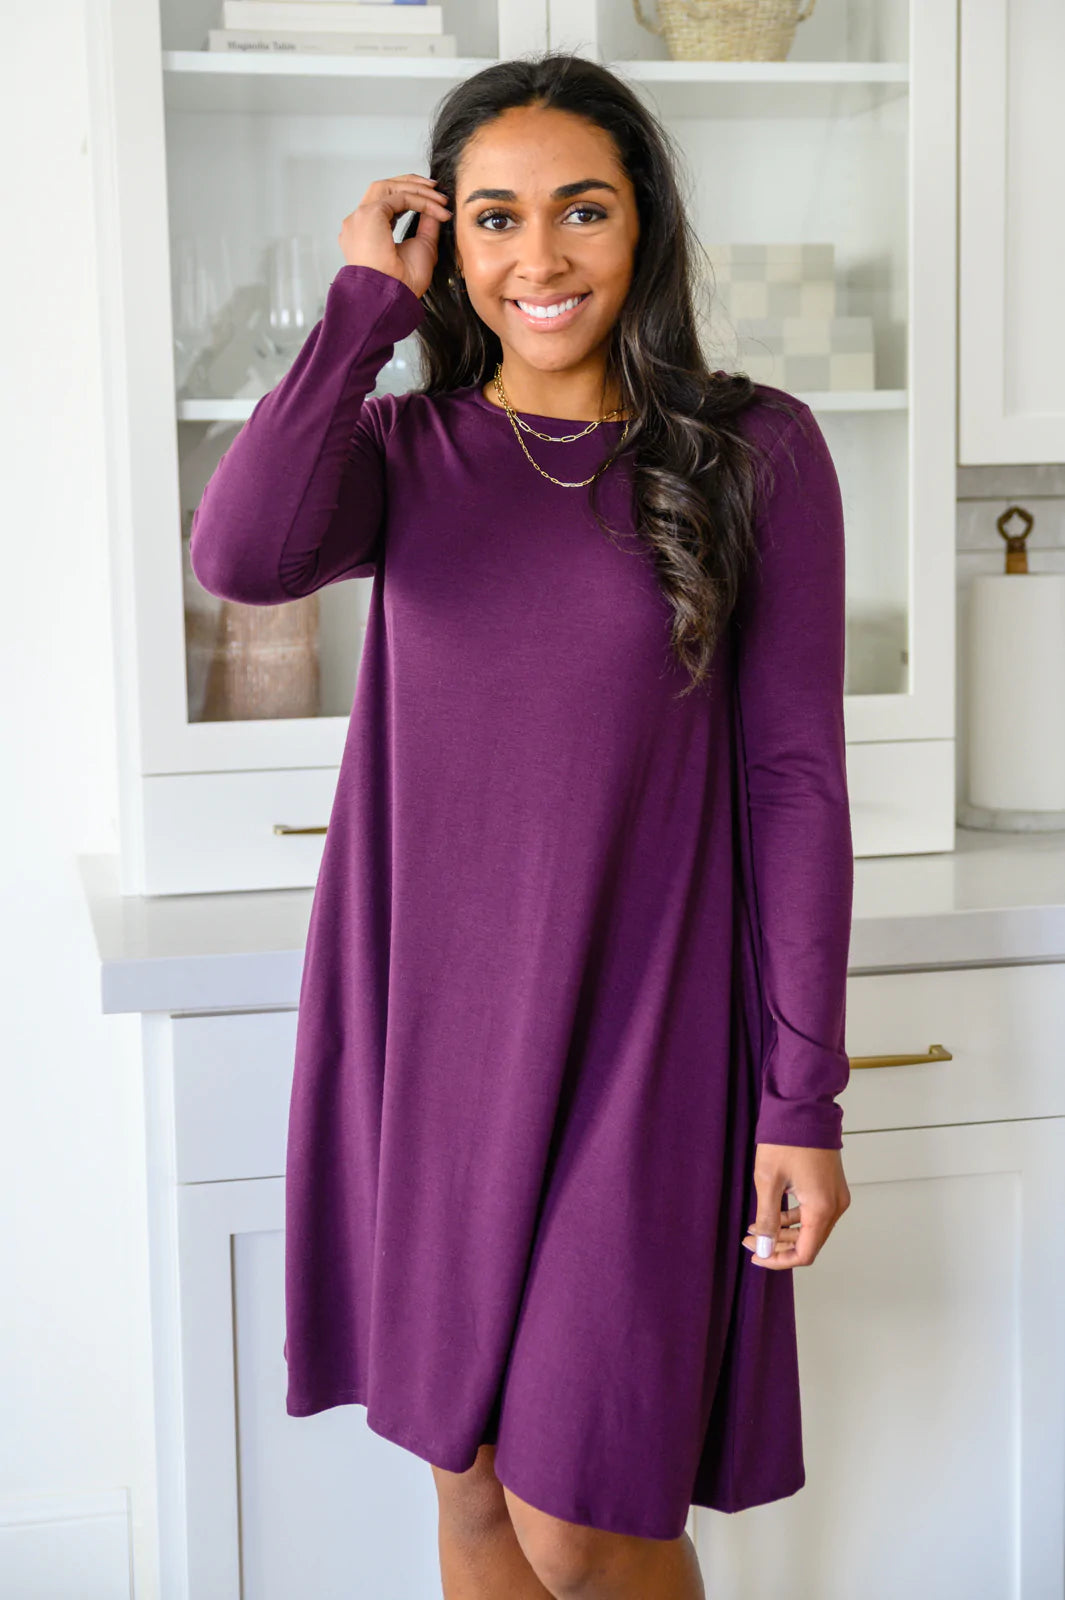 Brand Collab Brand Collab Most Reliable Long Sleeve Knit Dress In Plum